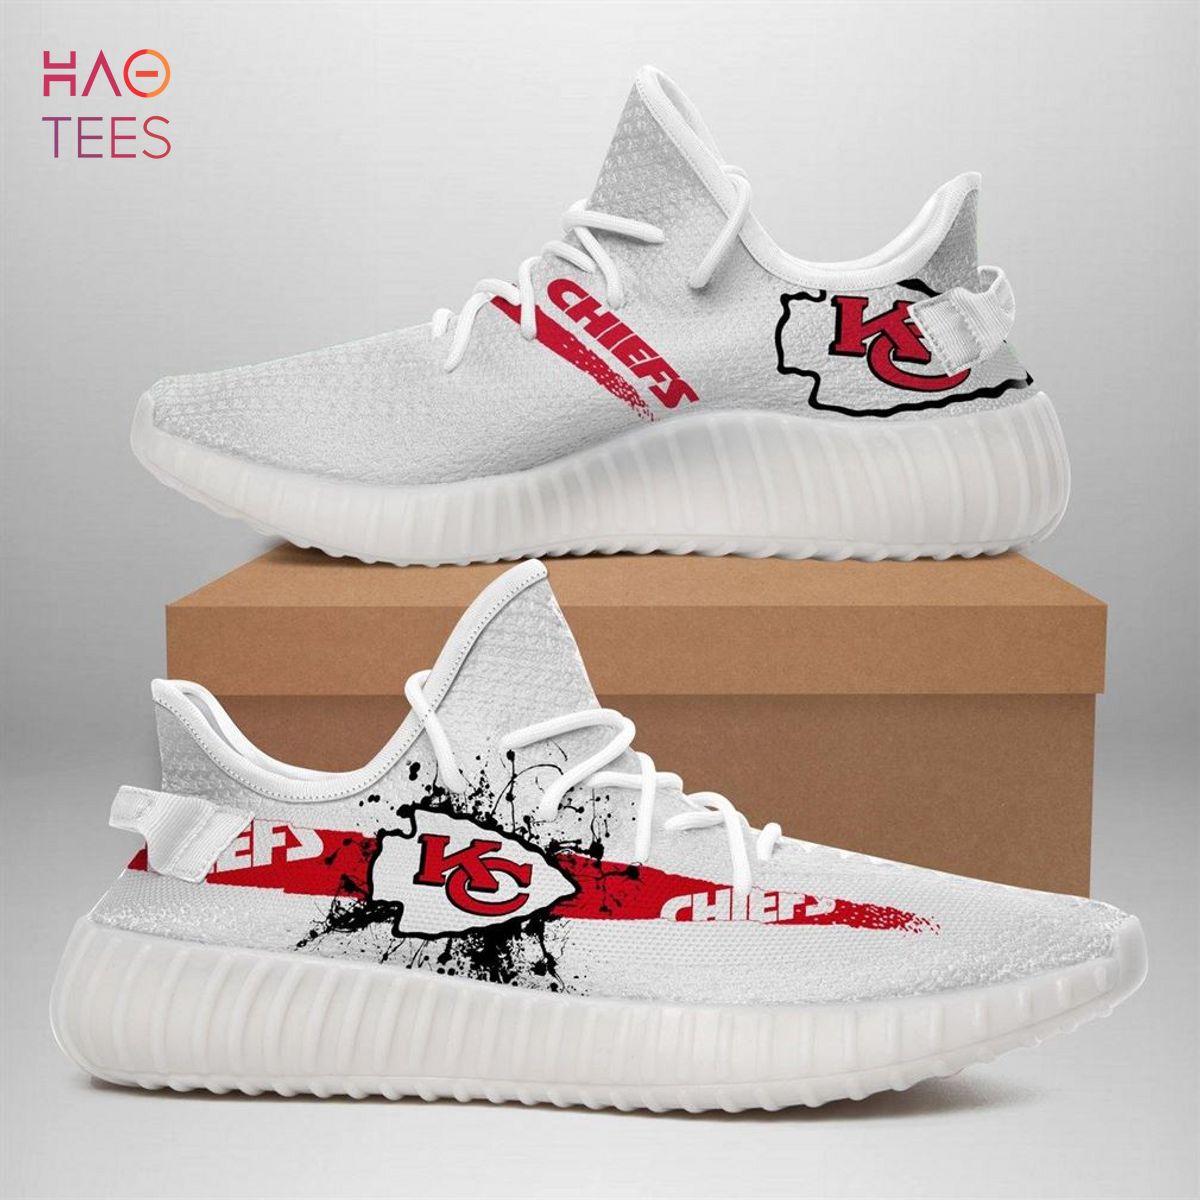 [TRENDDING] Kansas City Chiefs Nfl Sport Teams Runing Yeezy Sneakers Shoes